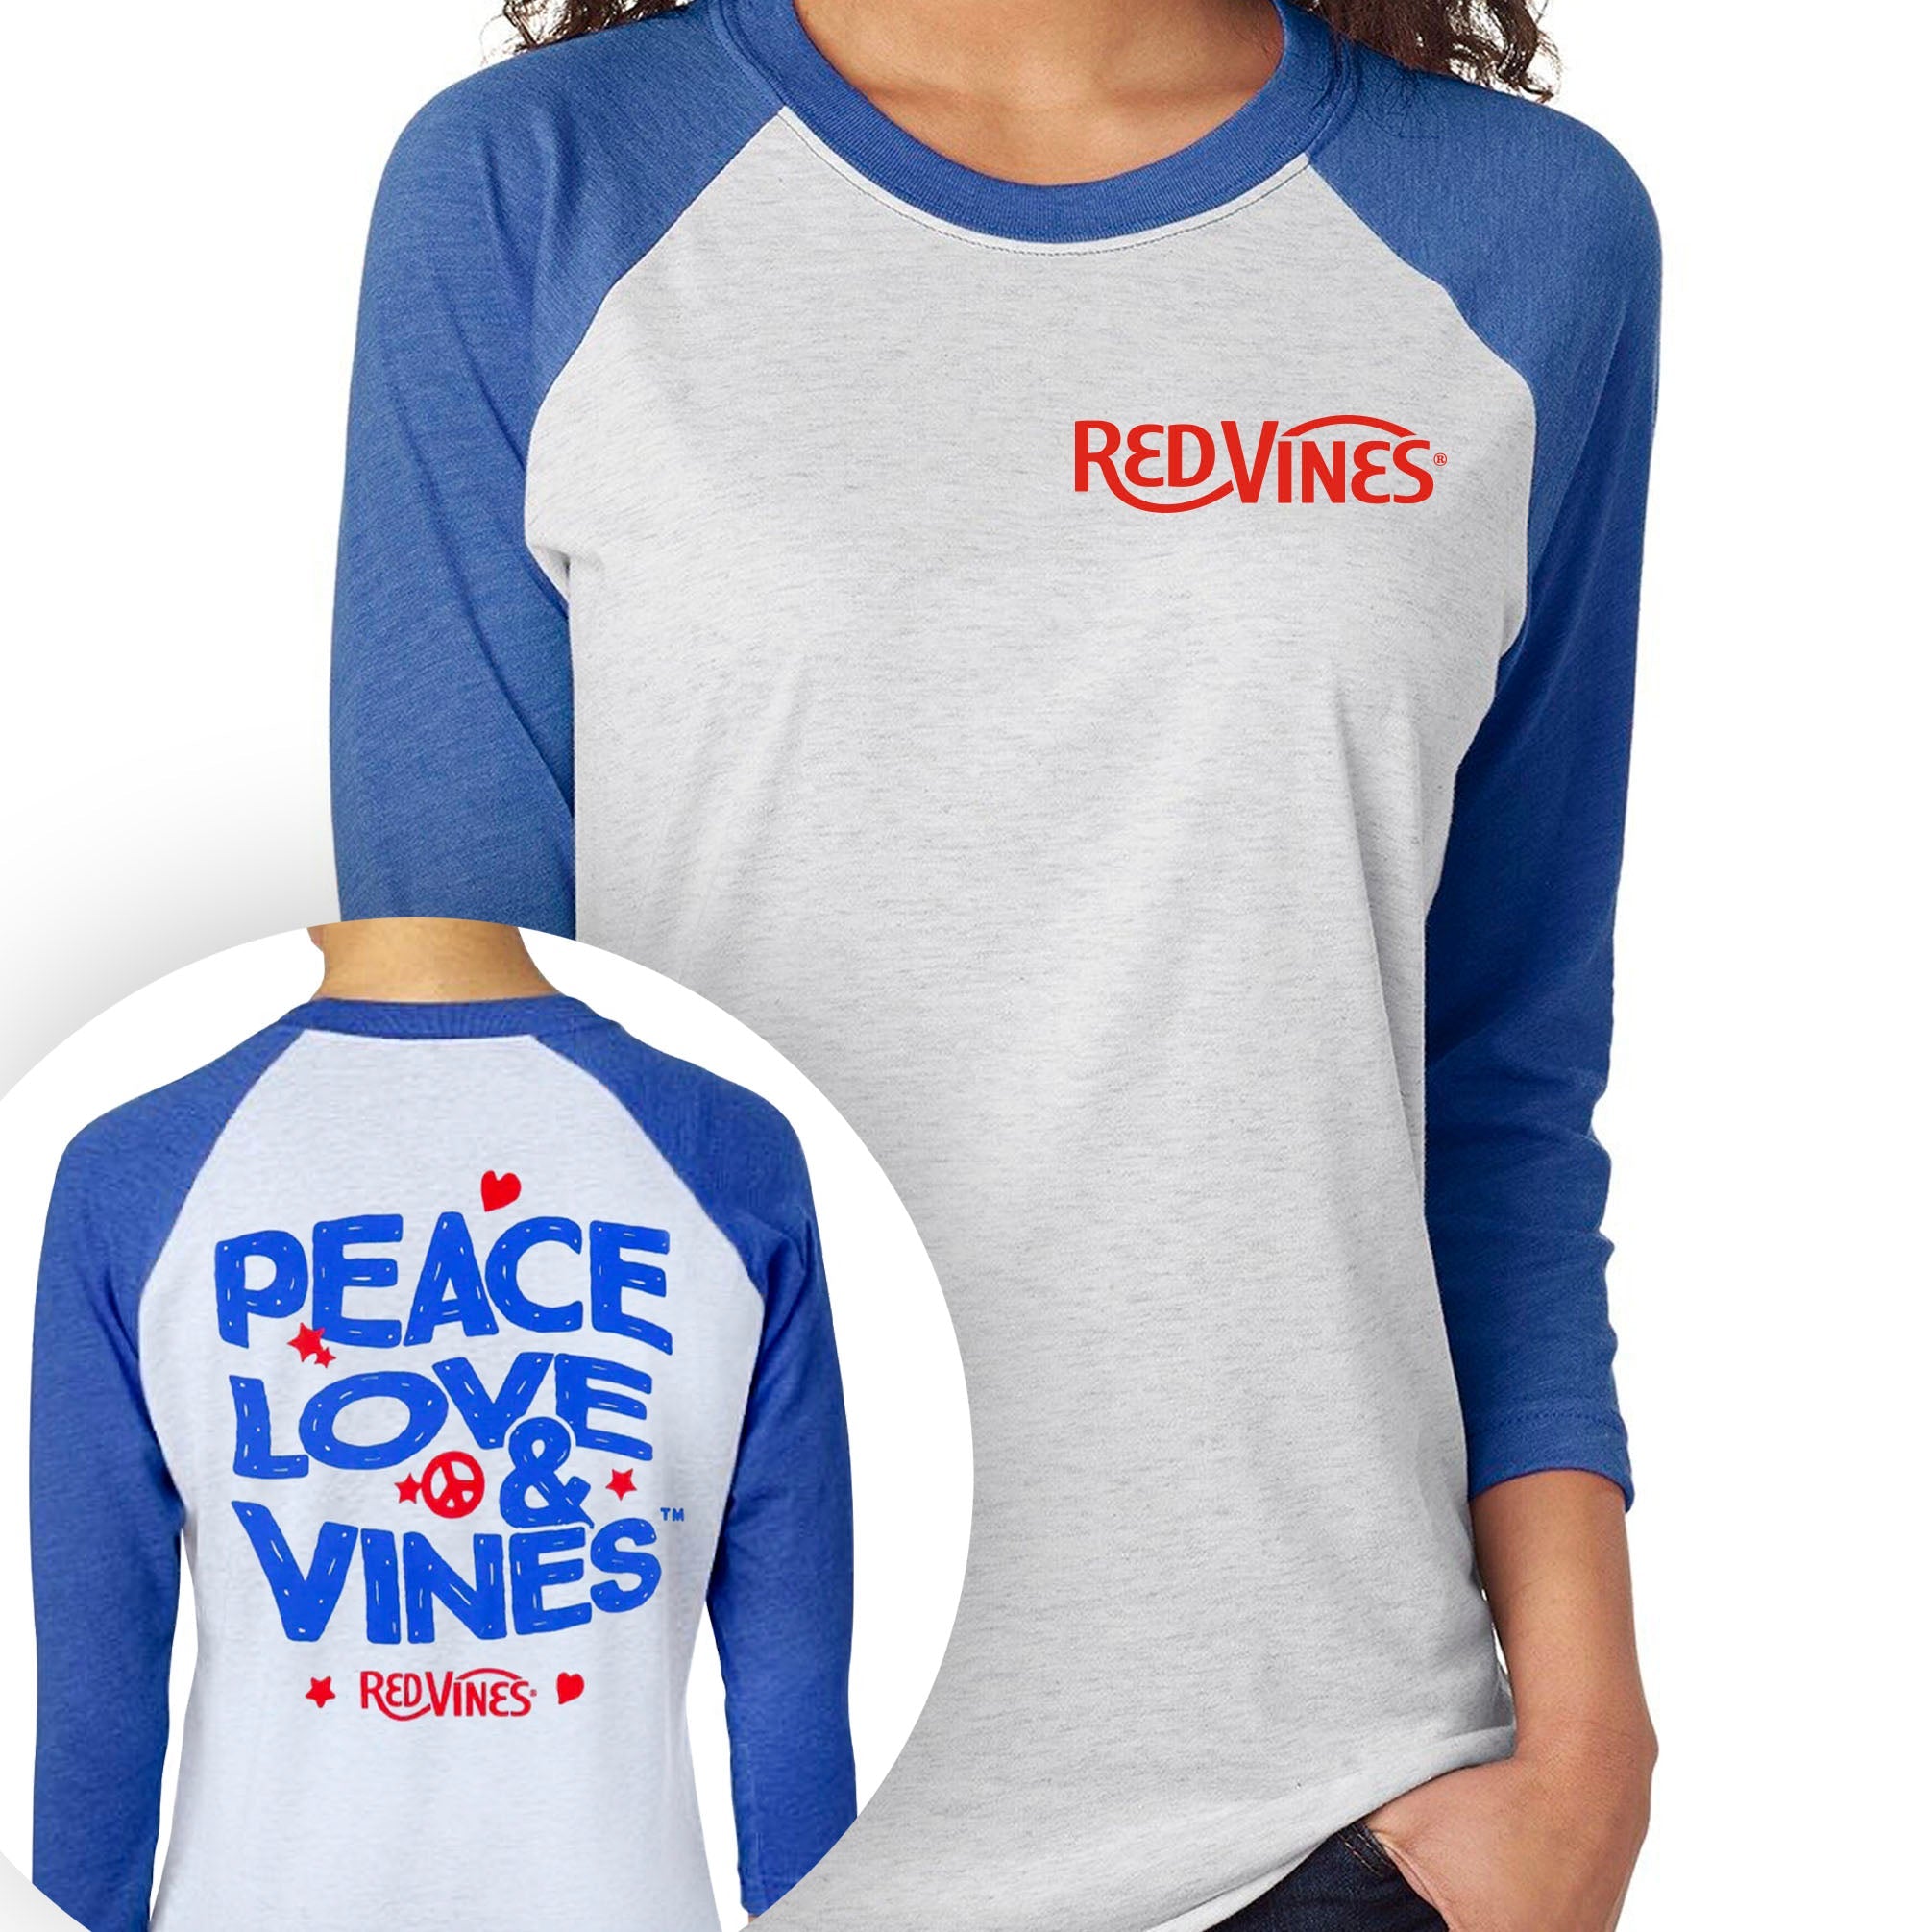 Grey 3/4 sleeve T-Shirt with blue sleeves, RED VINES logo on left chest, and large 